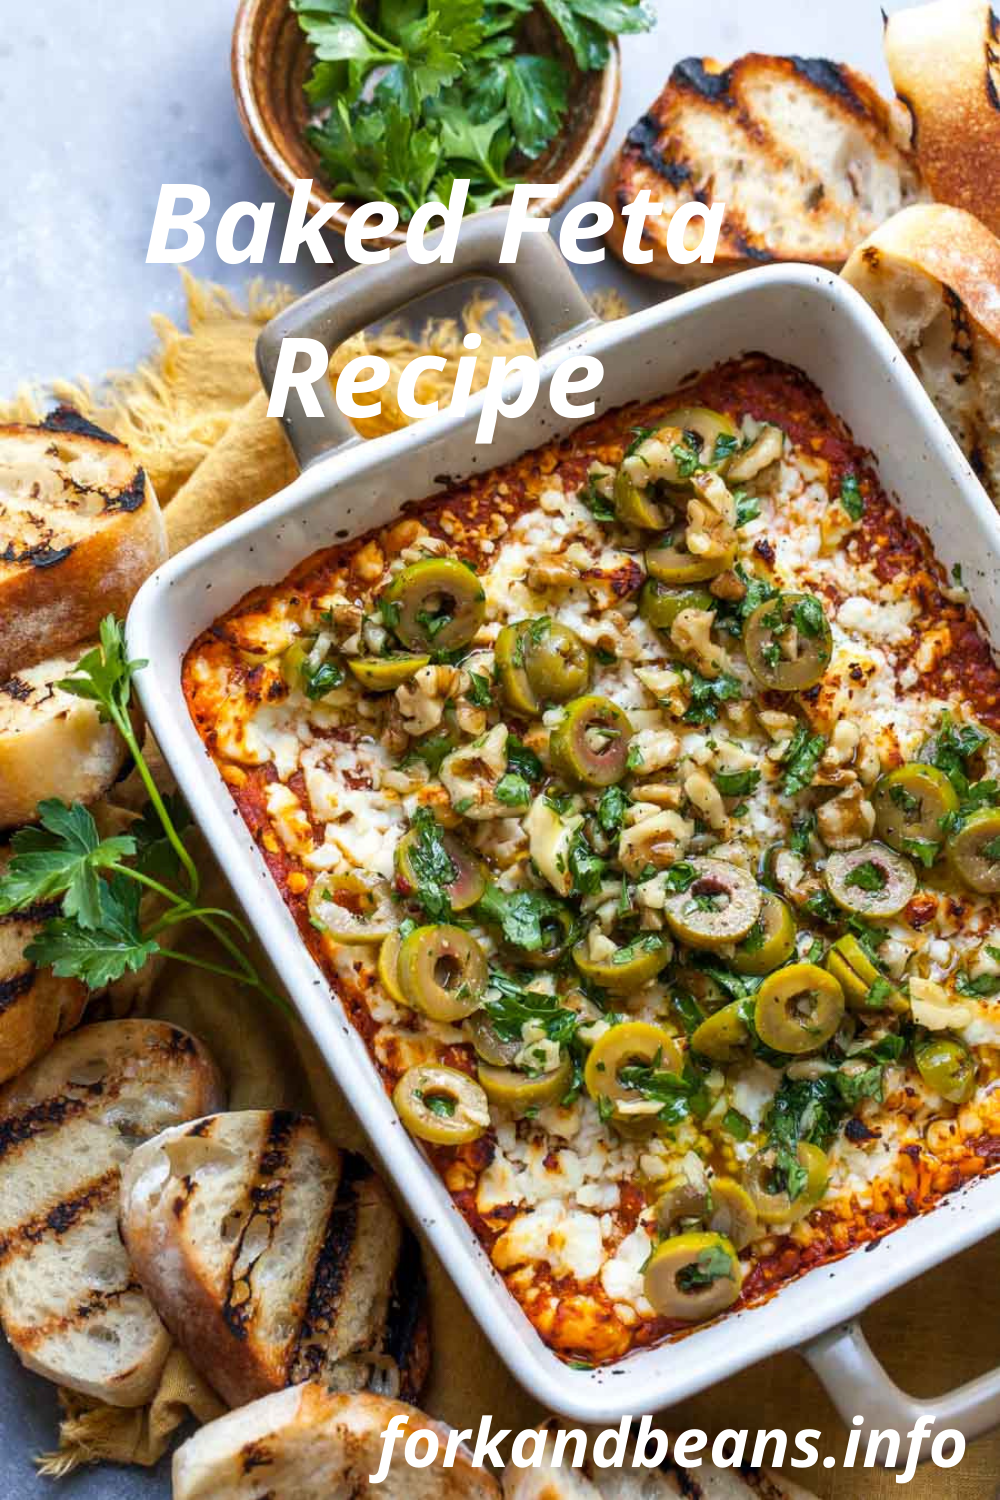 Moroccan Baked Feta with Olive Tapenade